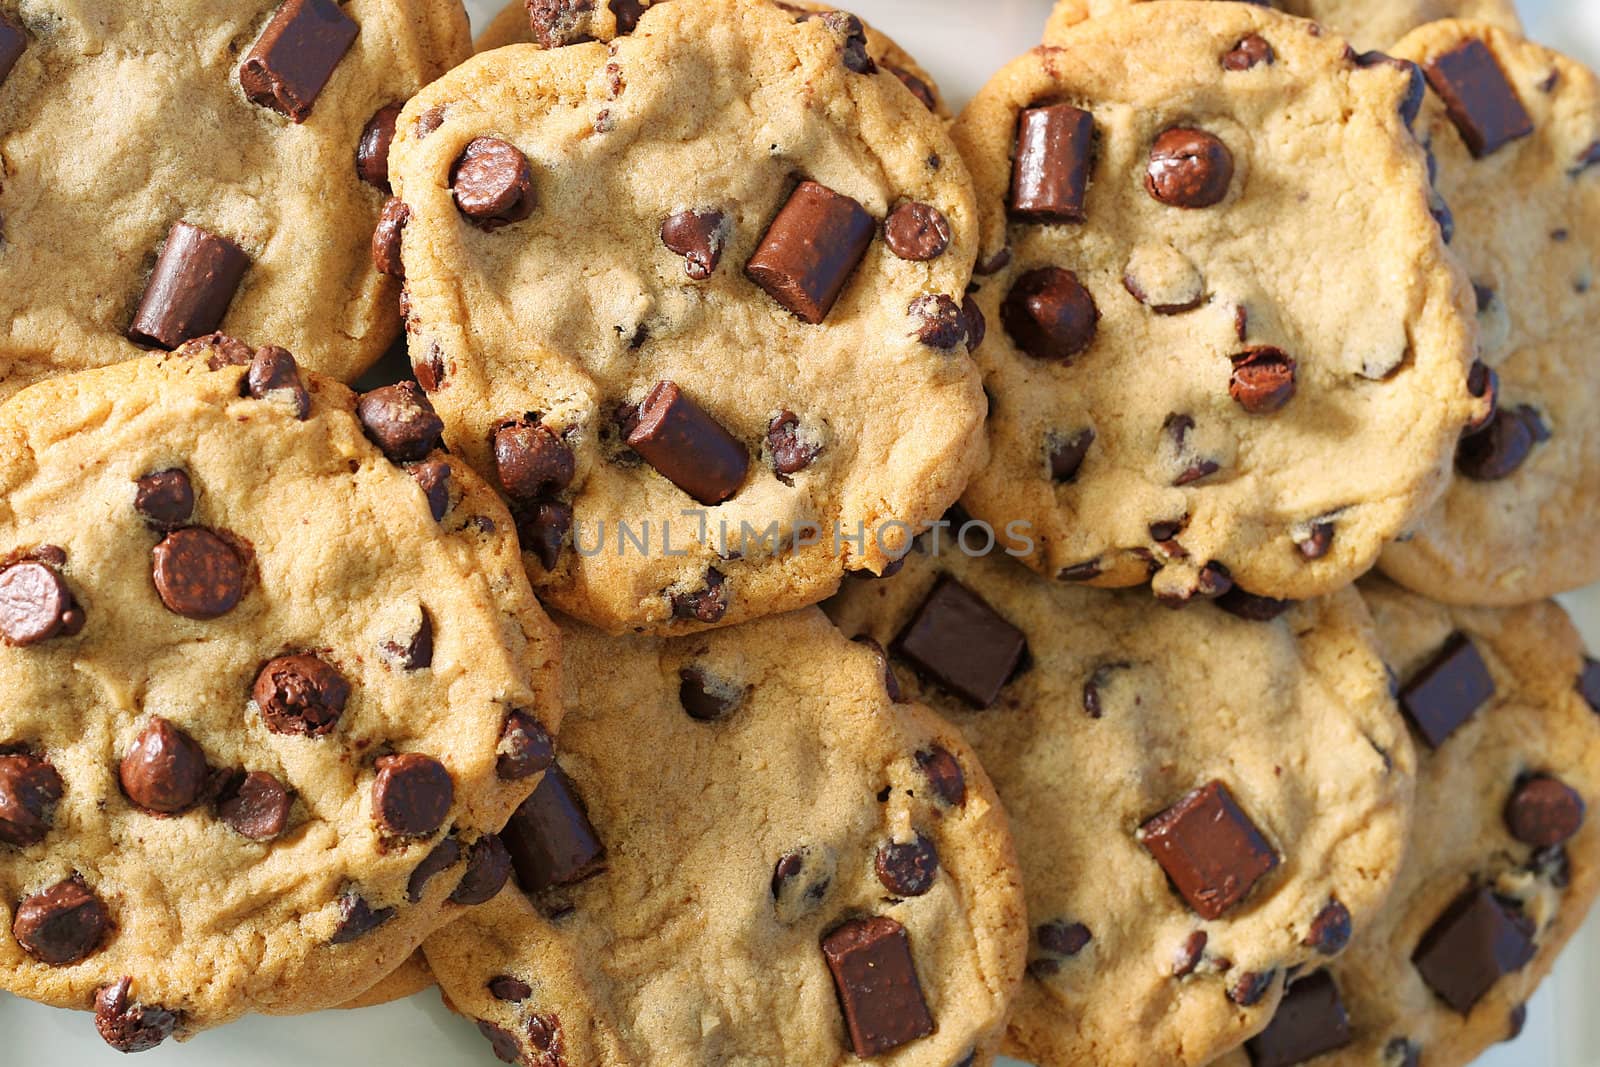 shot of chocolate chip cookies upclose by creativestock